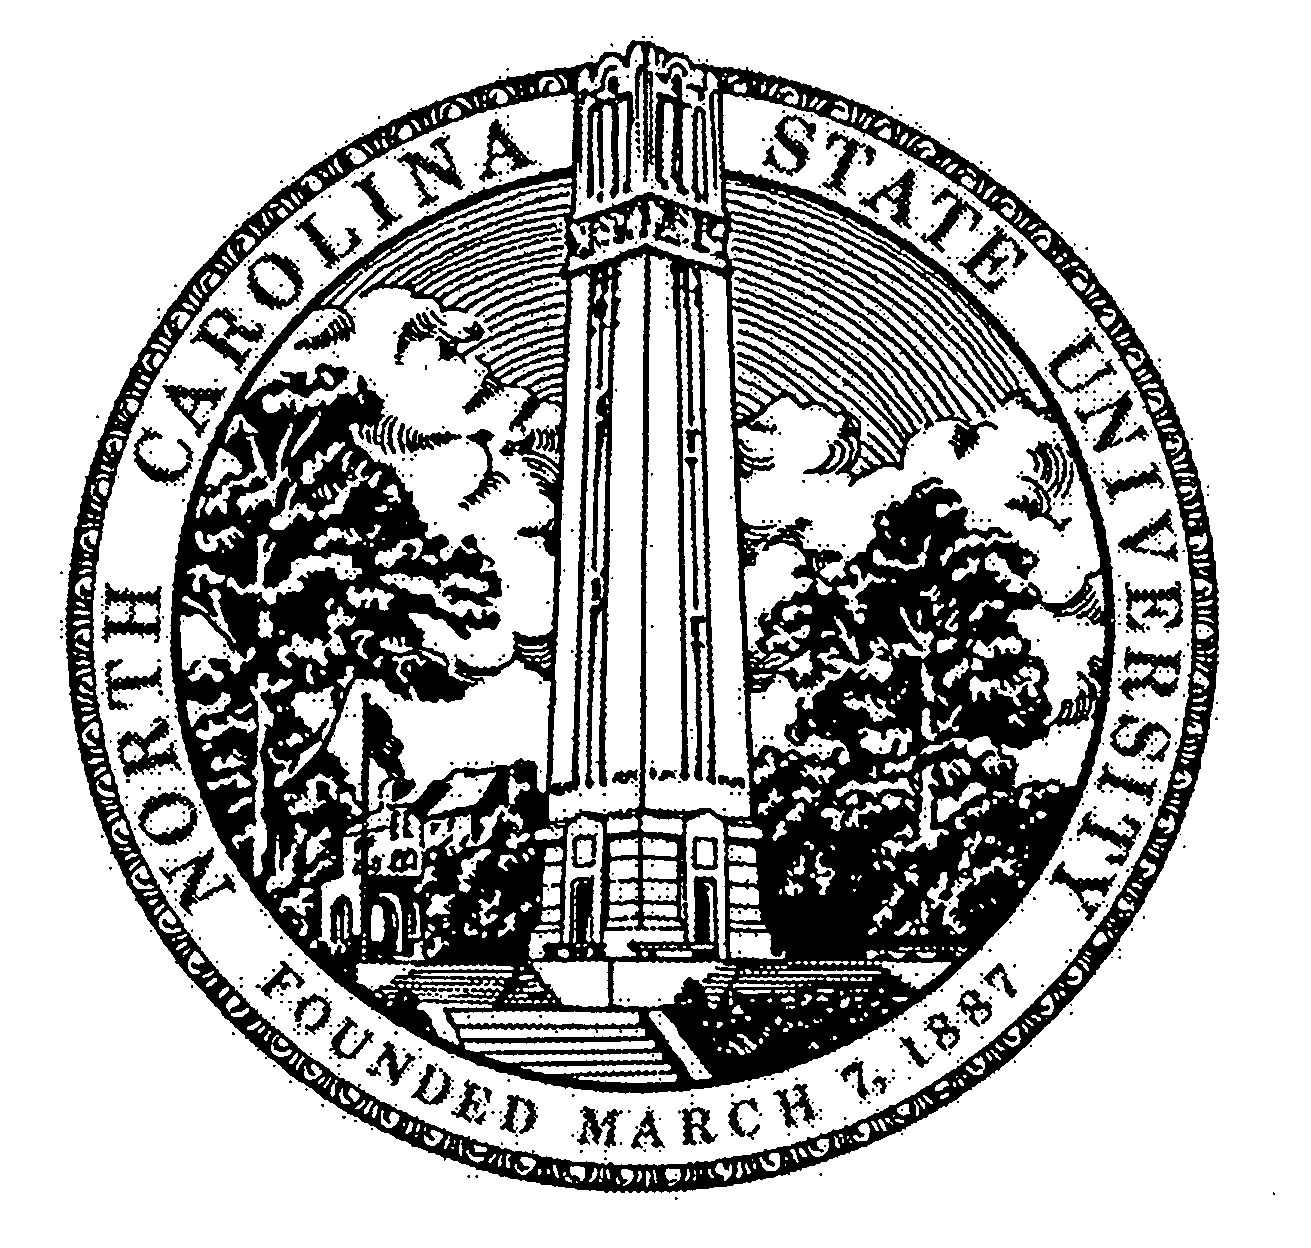  NORTH CAROLINA STATE UNIVERSITY FOUNDED MARCH 7, 1887